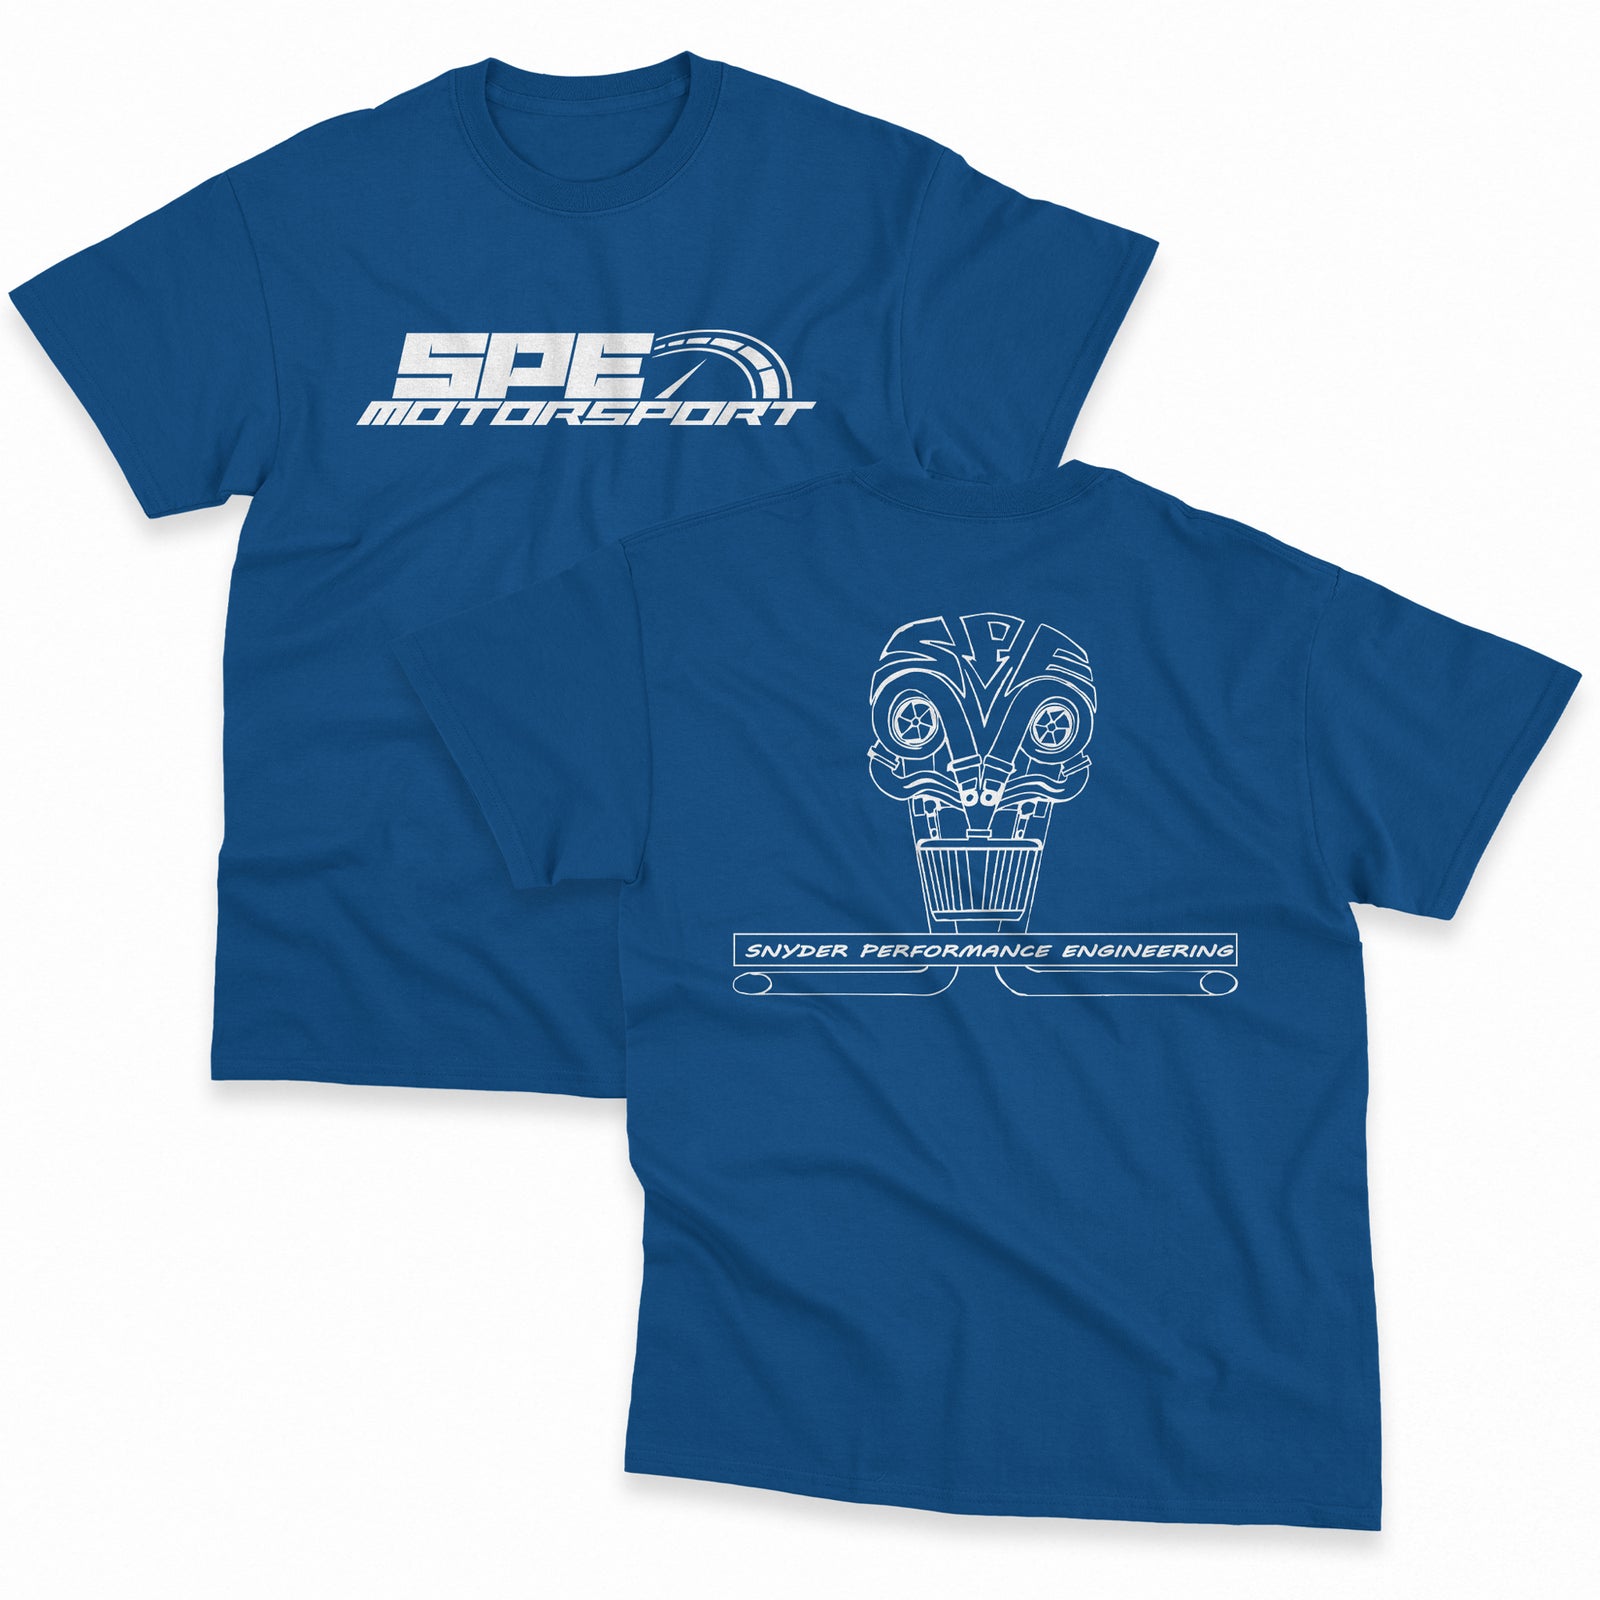 Professional, Bold, Technology Equipment T-shirt Design for a Company by  75-R-P-Z